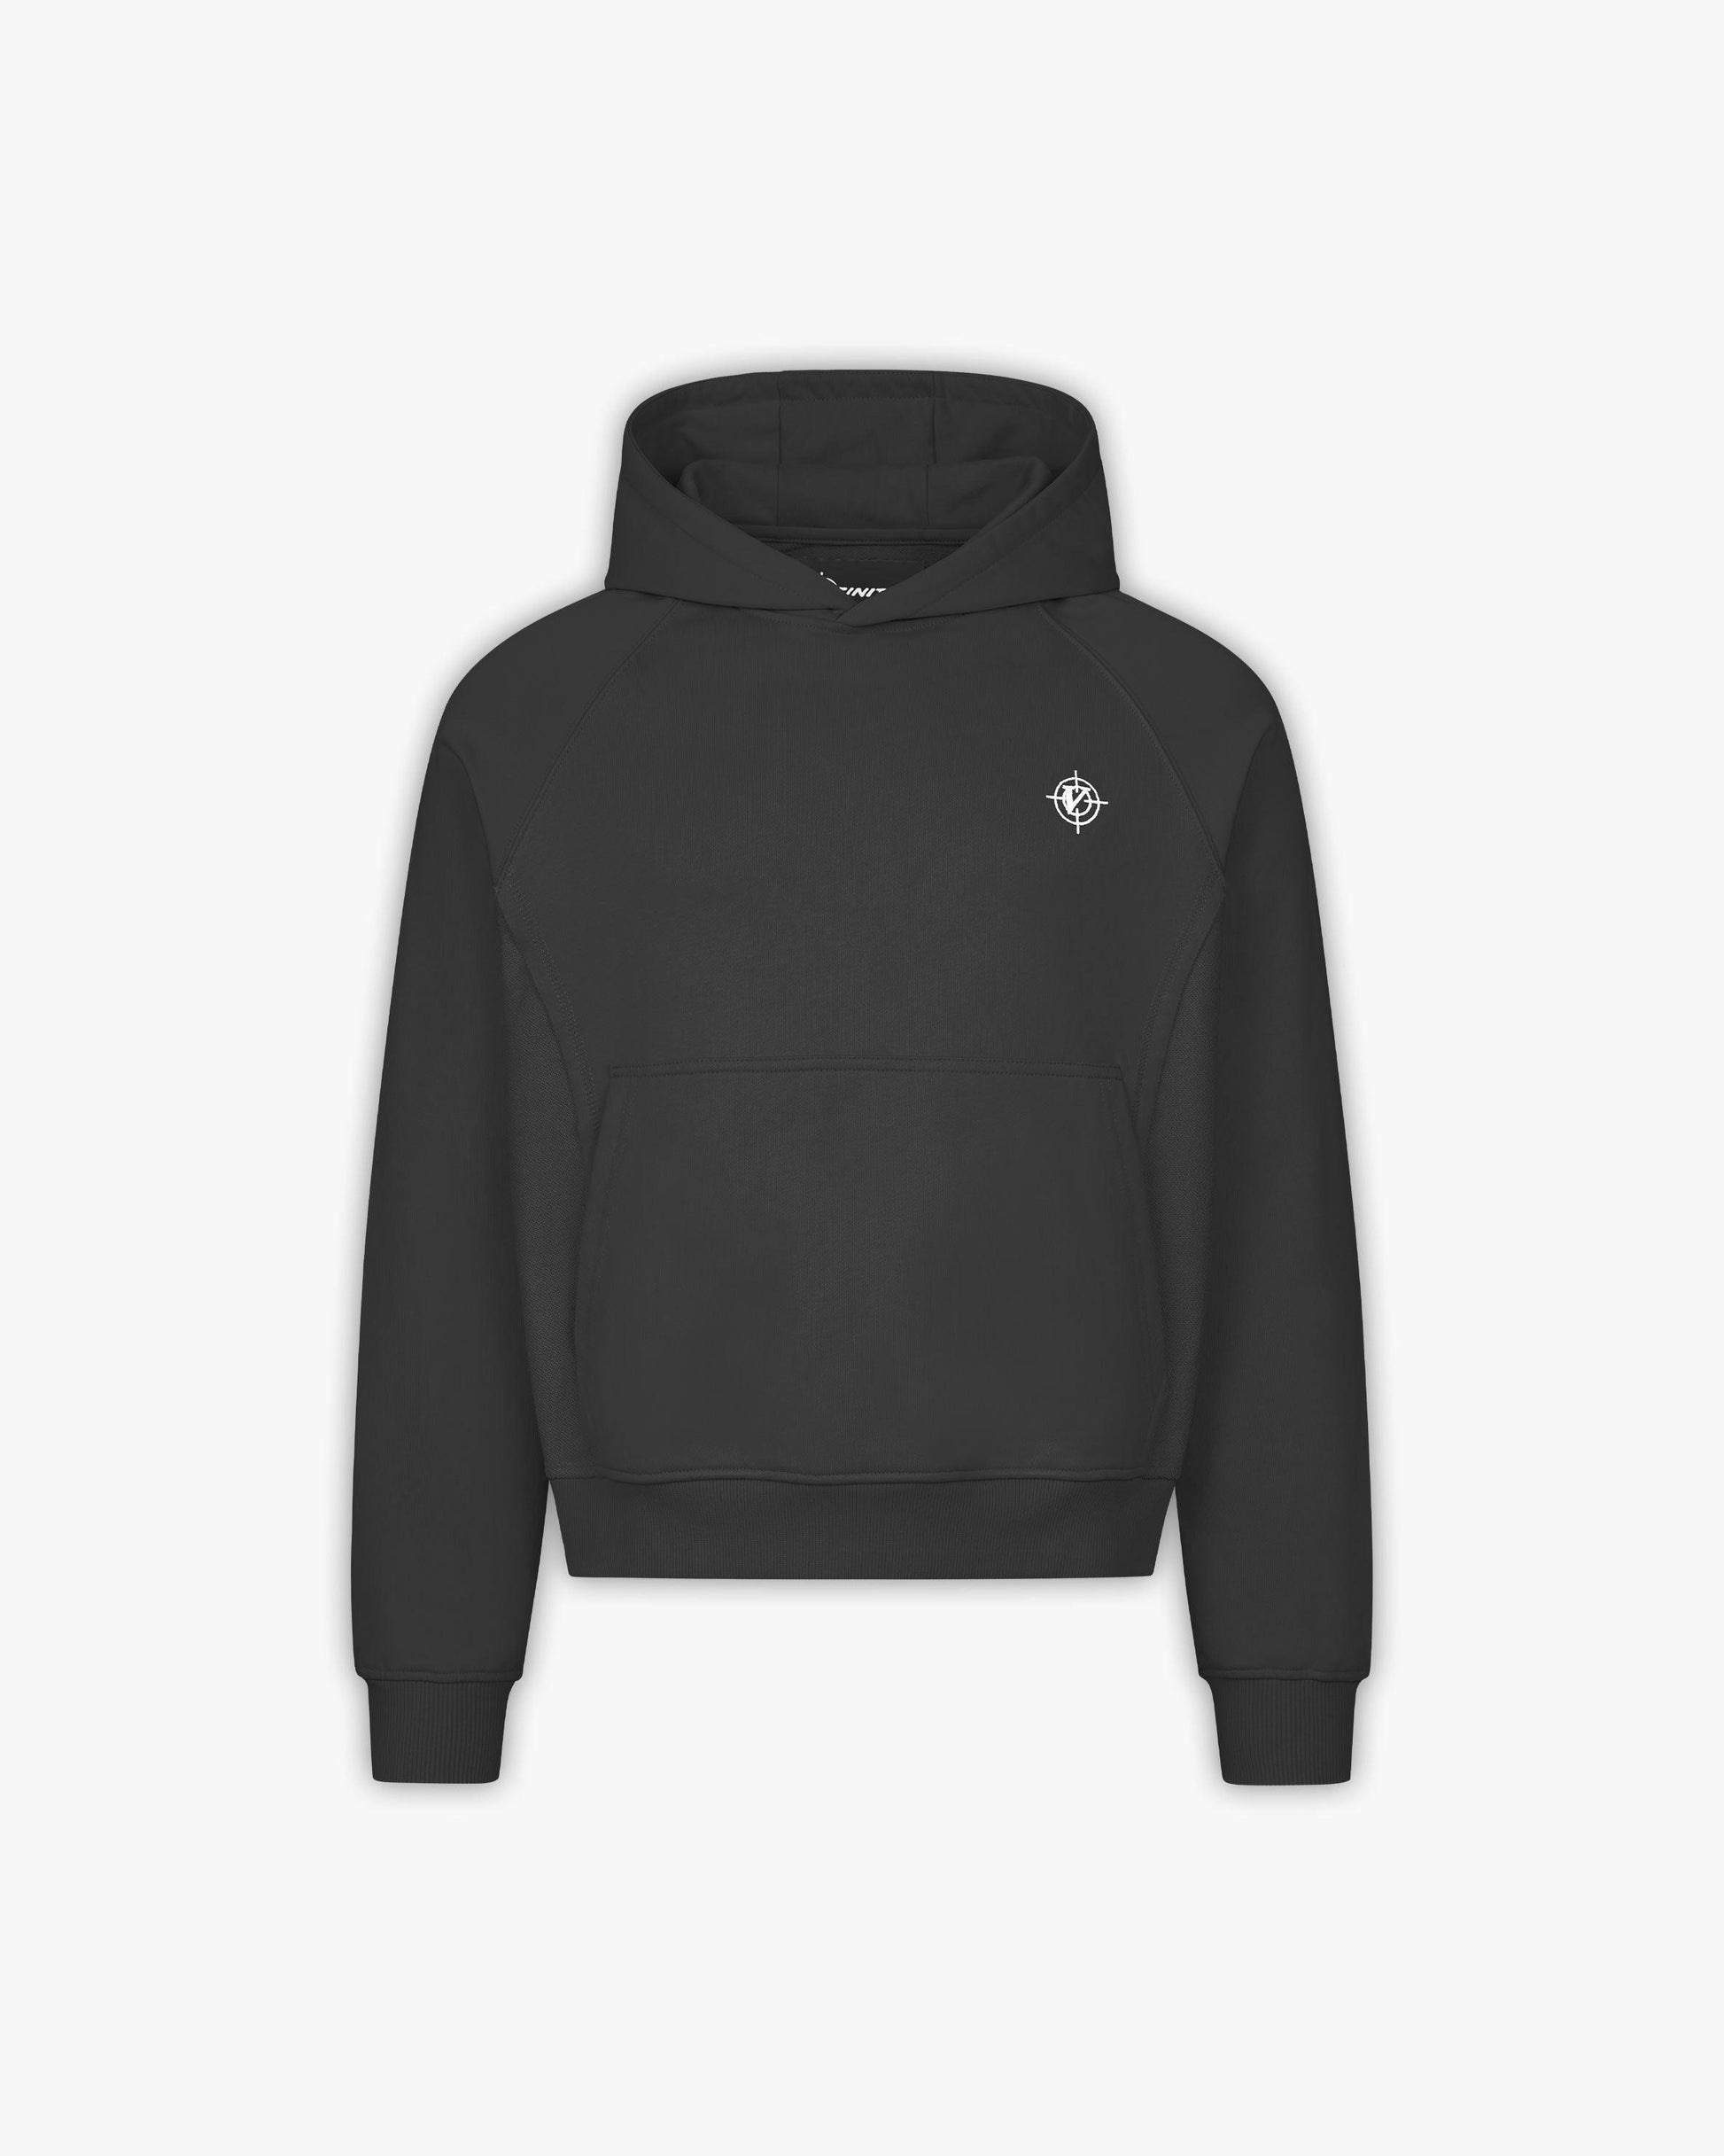 INSIDE OUT HOODIE ASH GREY - VICINITY